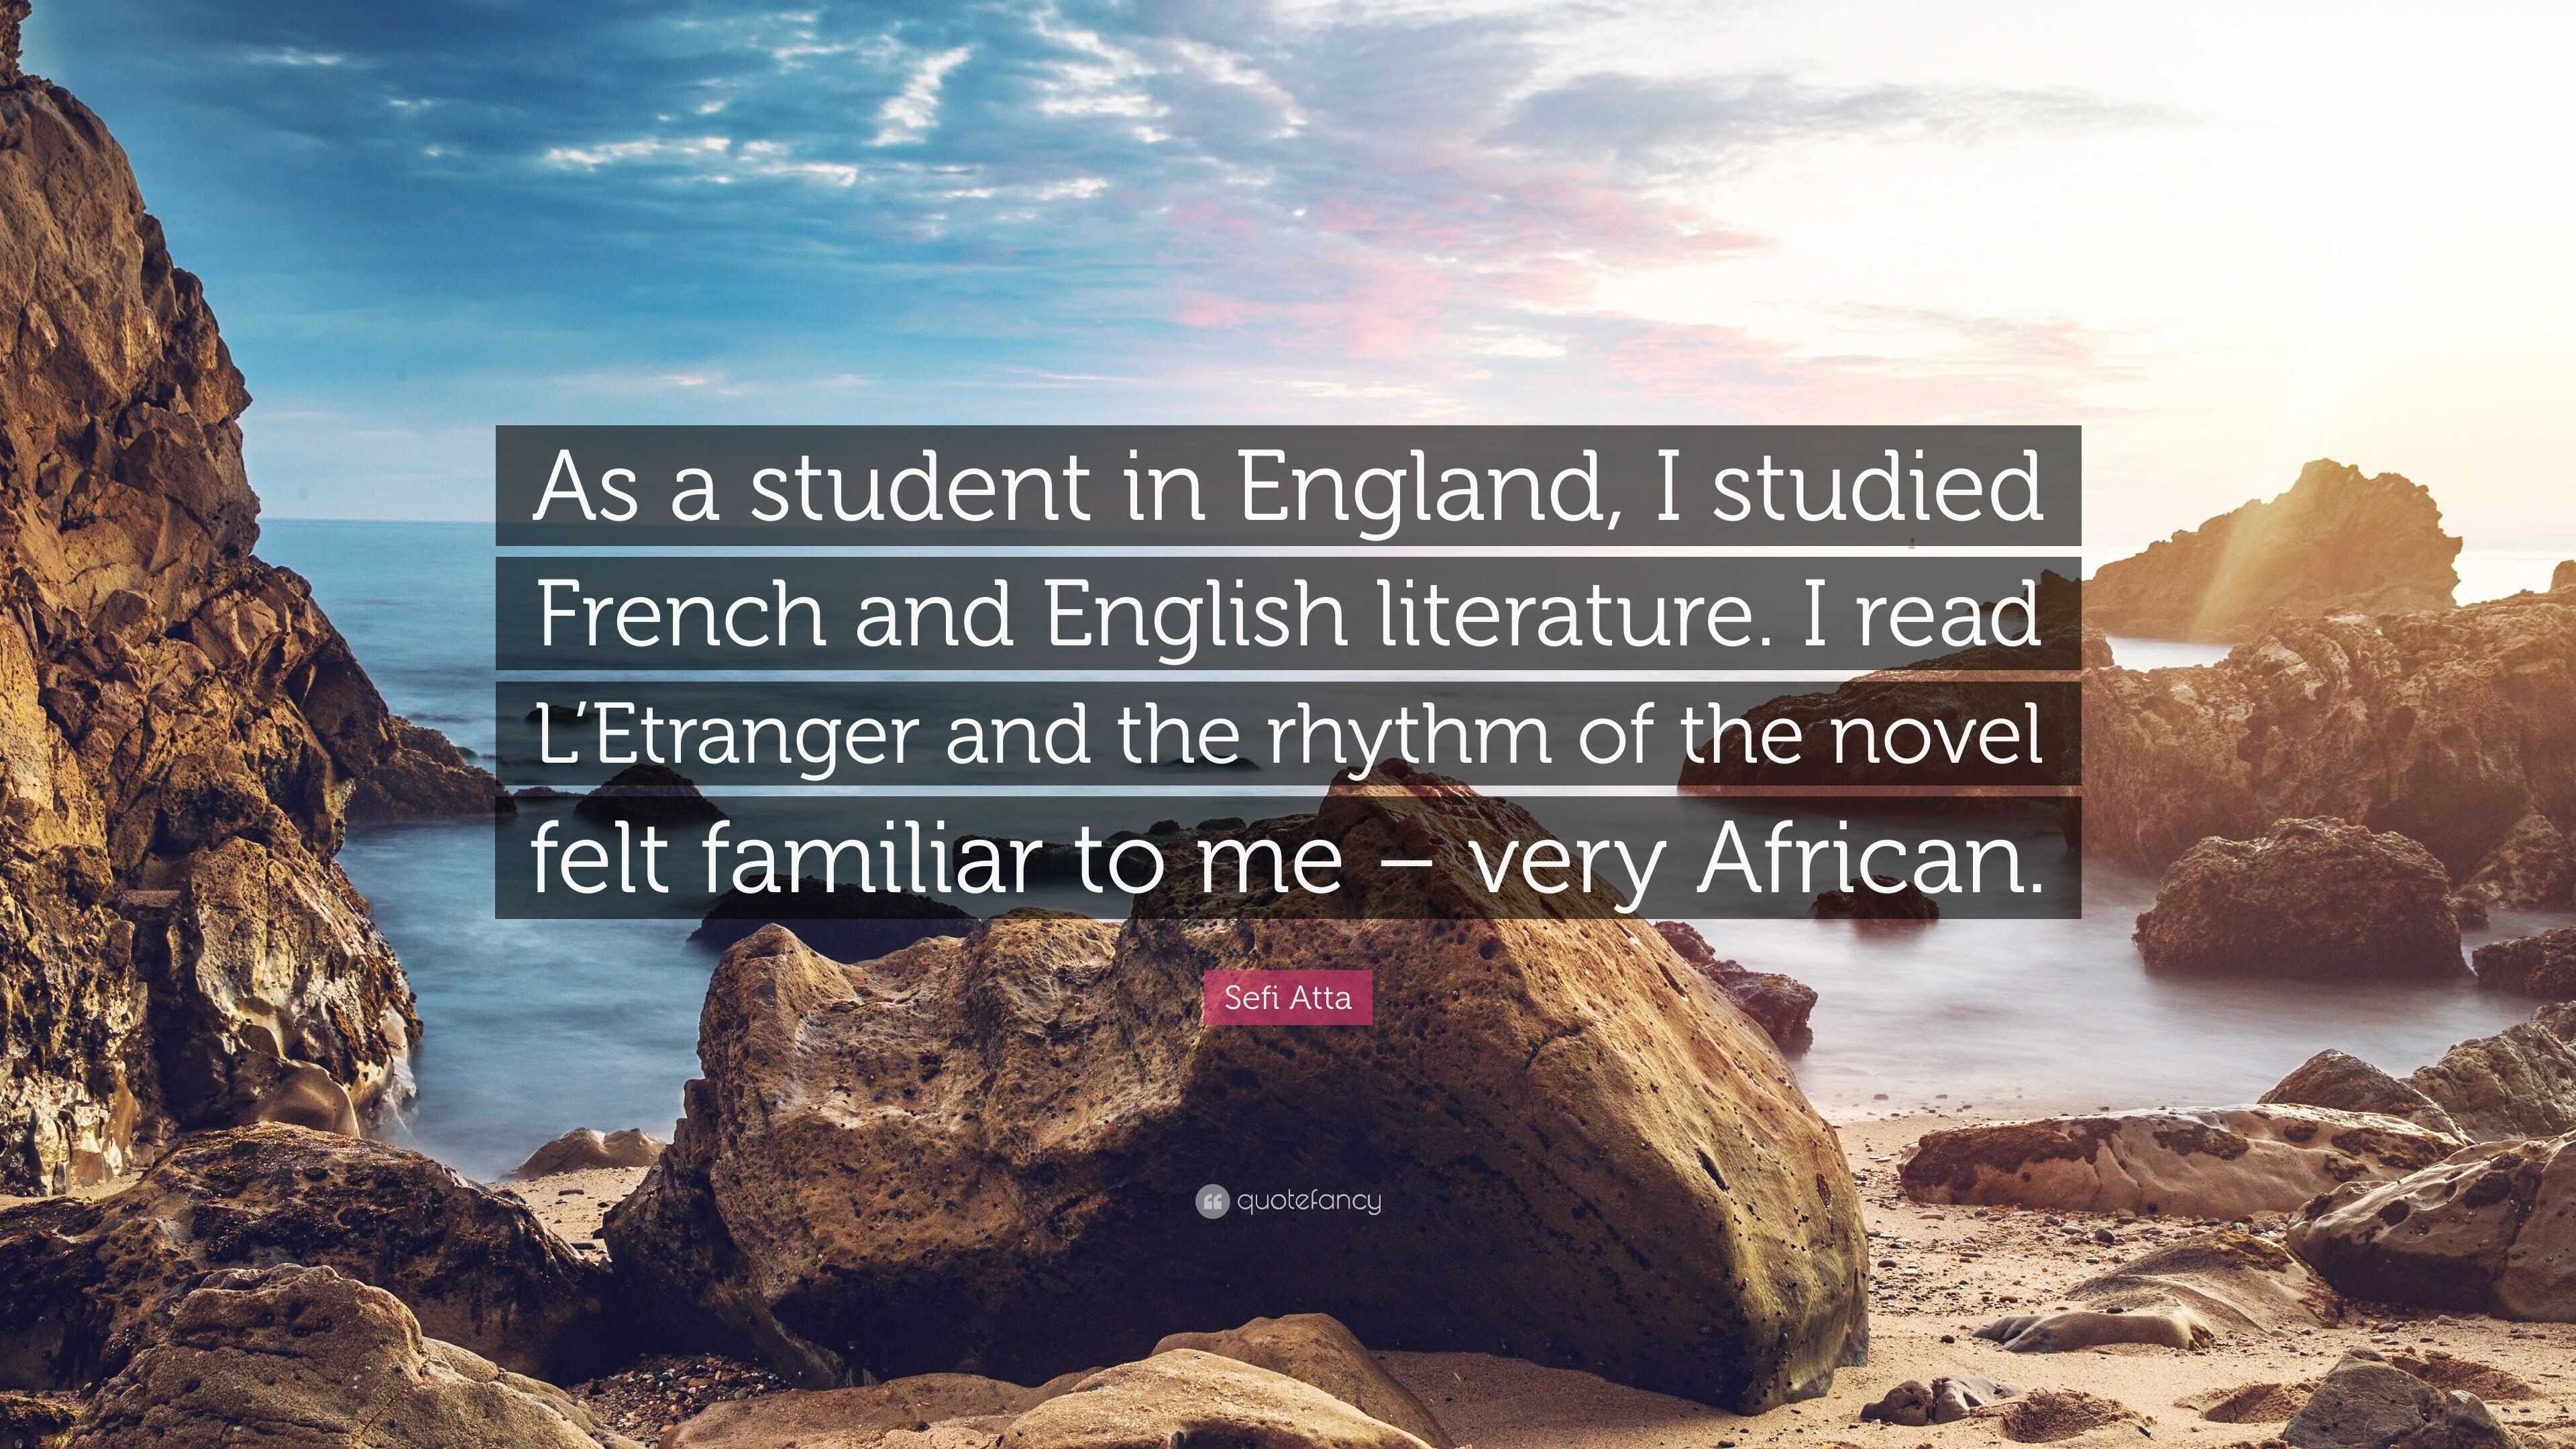 Sefi Atta Quote As A Student In England I Studied French And English Literature I Read L Etranger And The Rhythm Of The Novel Felt Fam